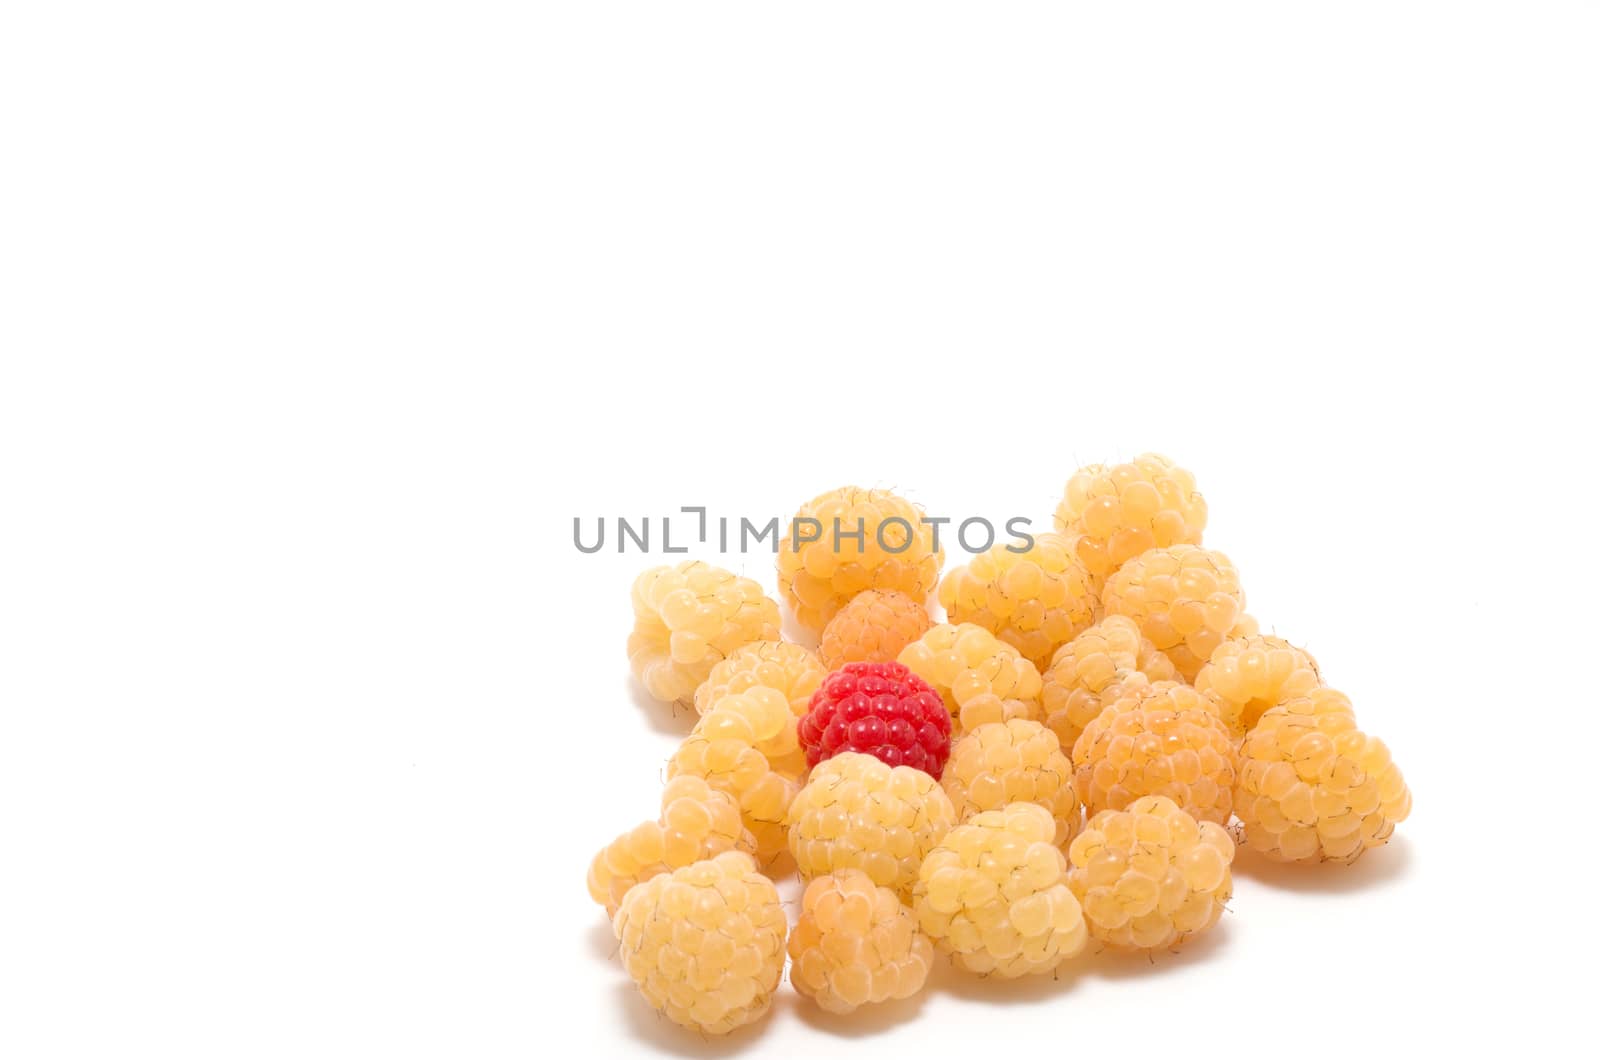 One red among several yellow raspberries  by daoleduc